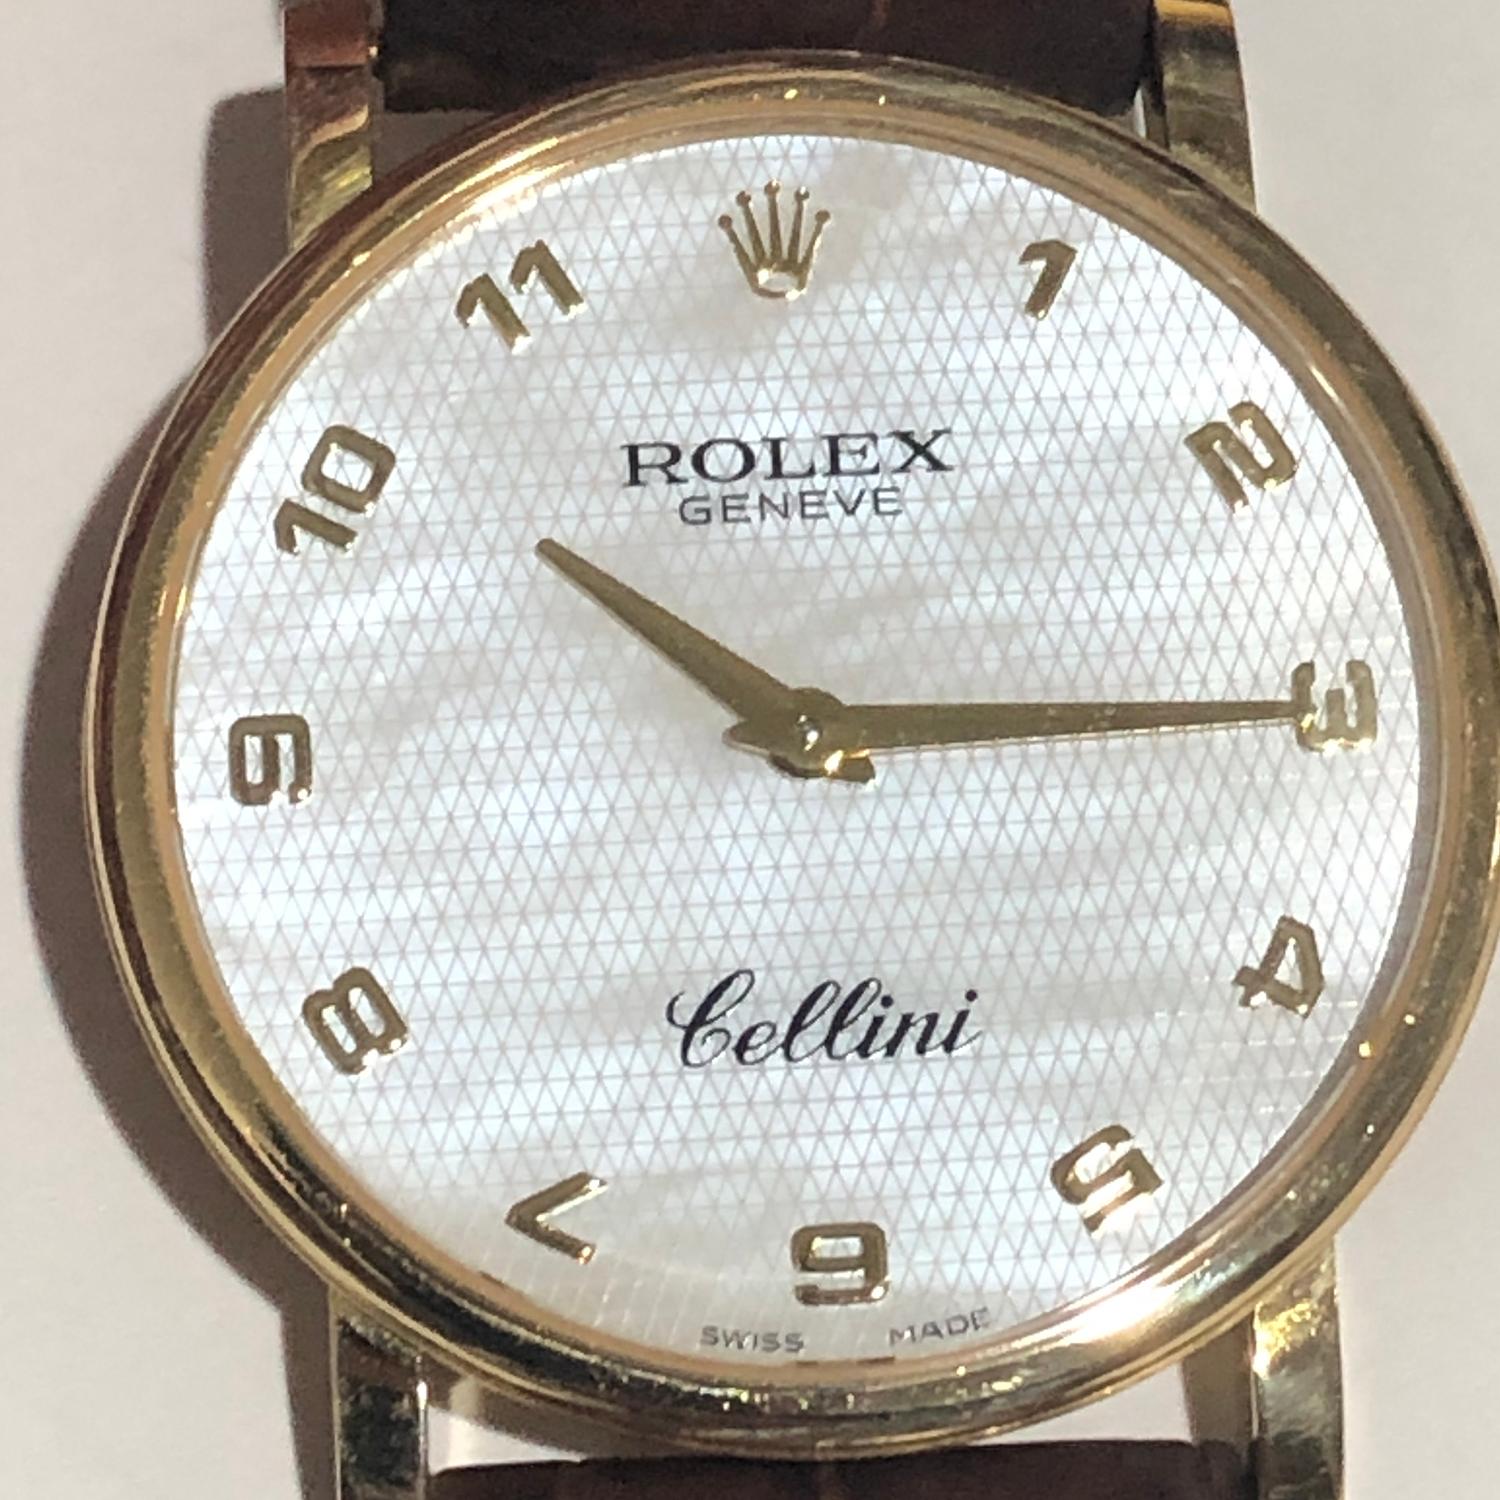 Rolex Cellini Classic 18k Yellow Gold Men's Watch 5115 For Sale 4